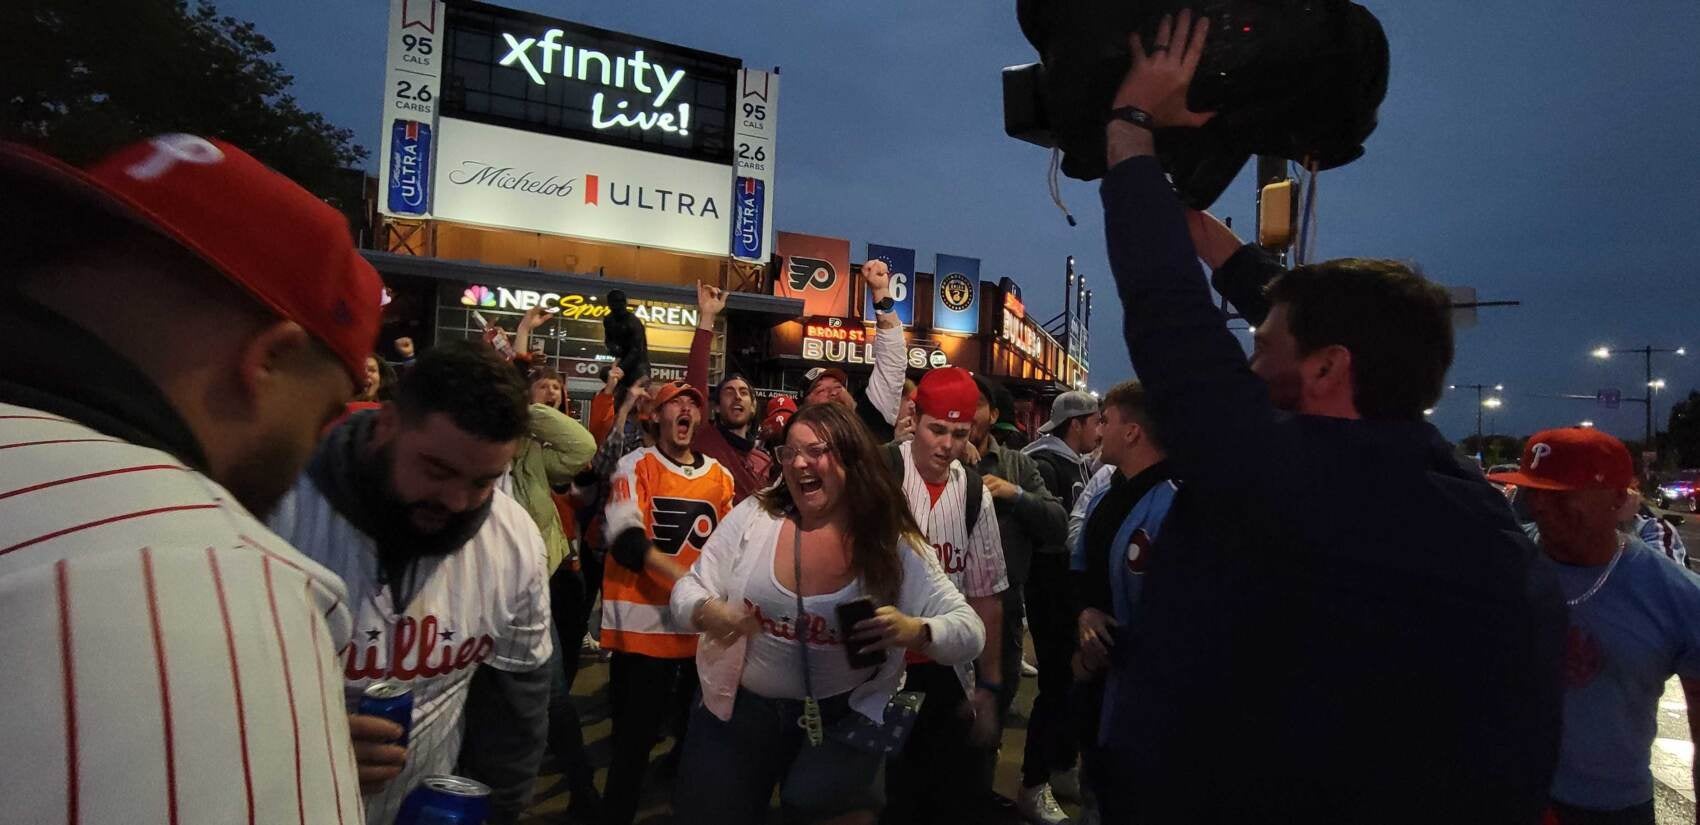 Fans celebrated outside of Xfinity Live! the second the Phillies clinched the NLCS on Oct. 23, 2022.